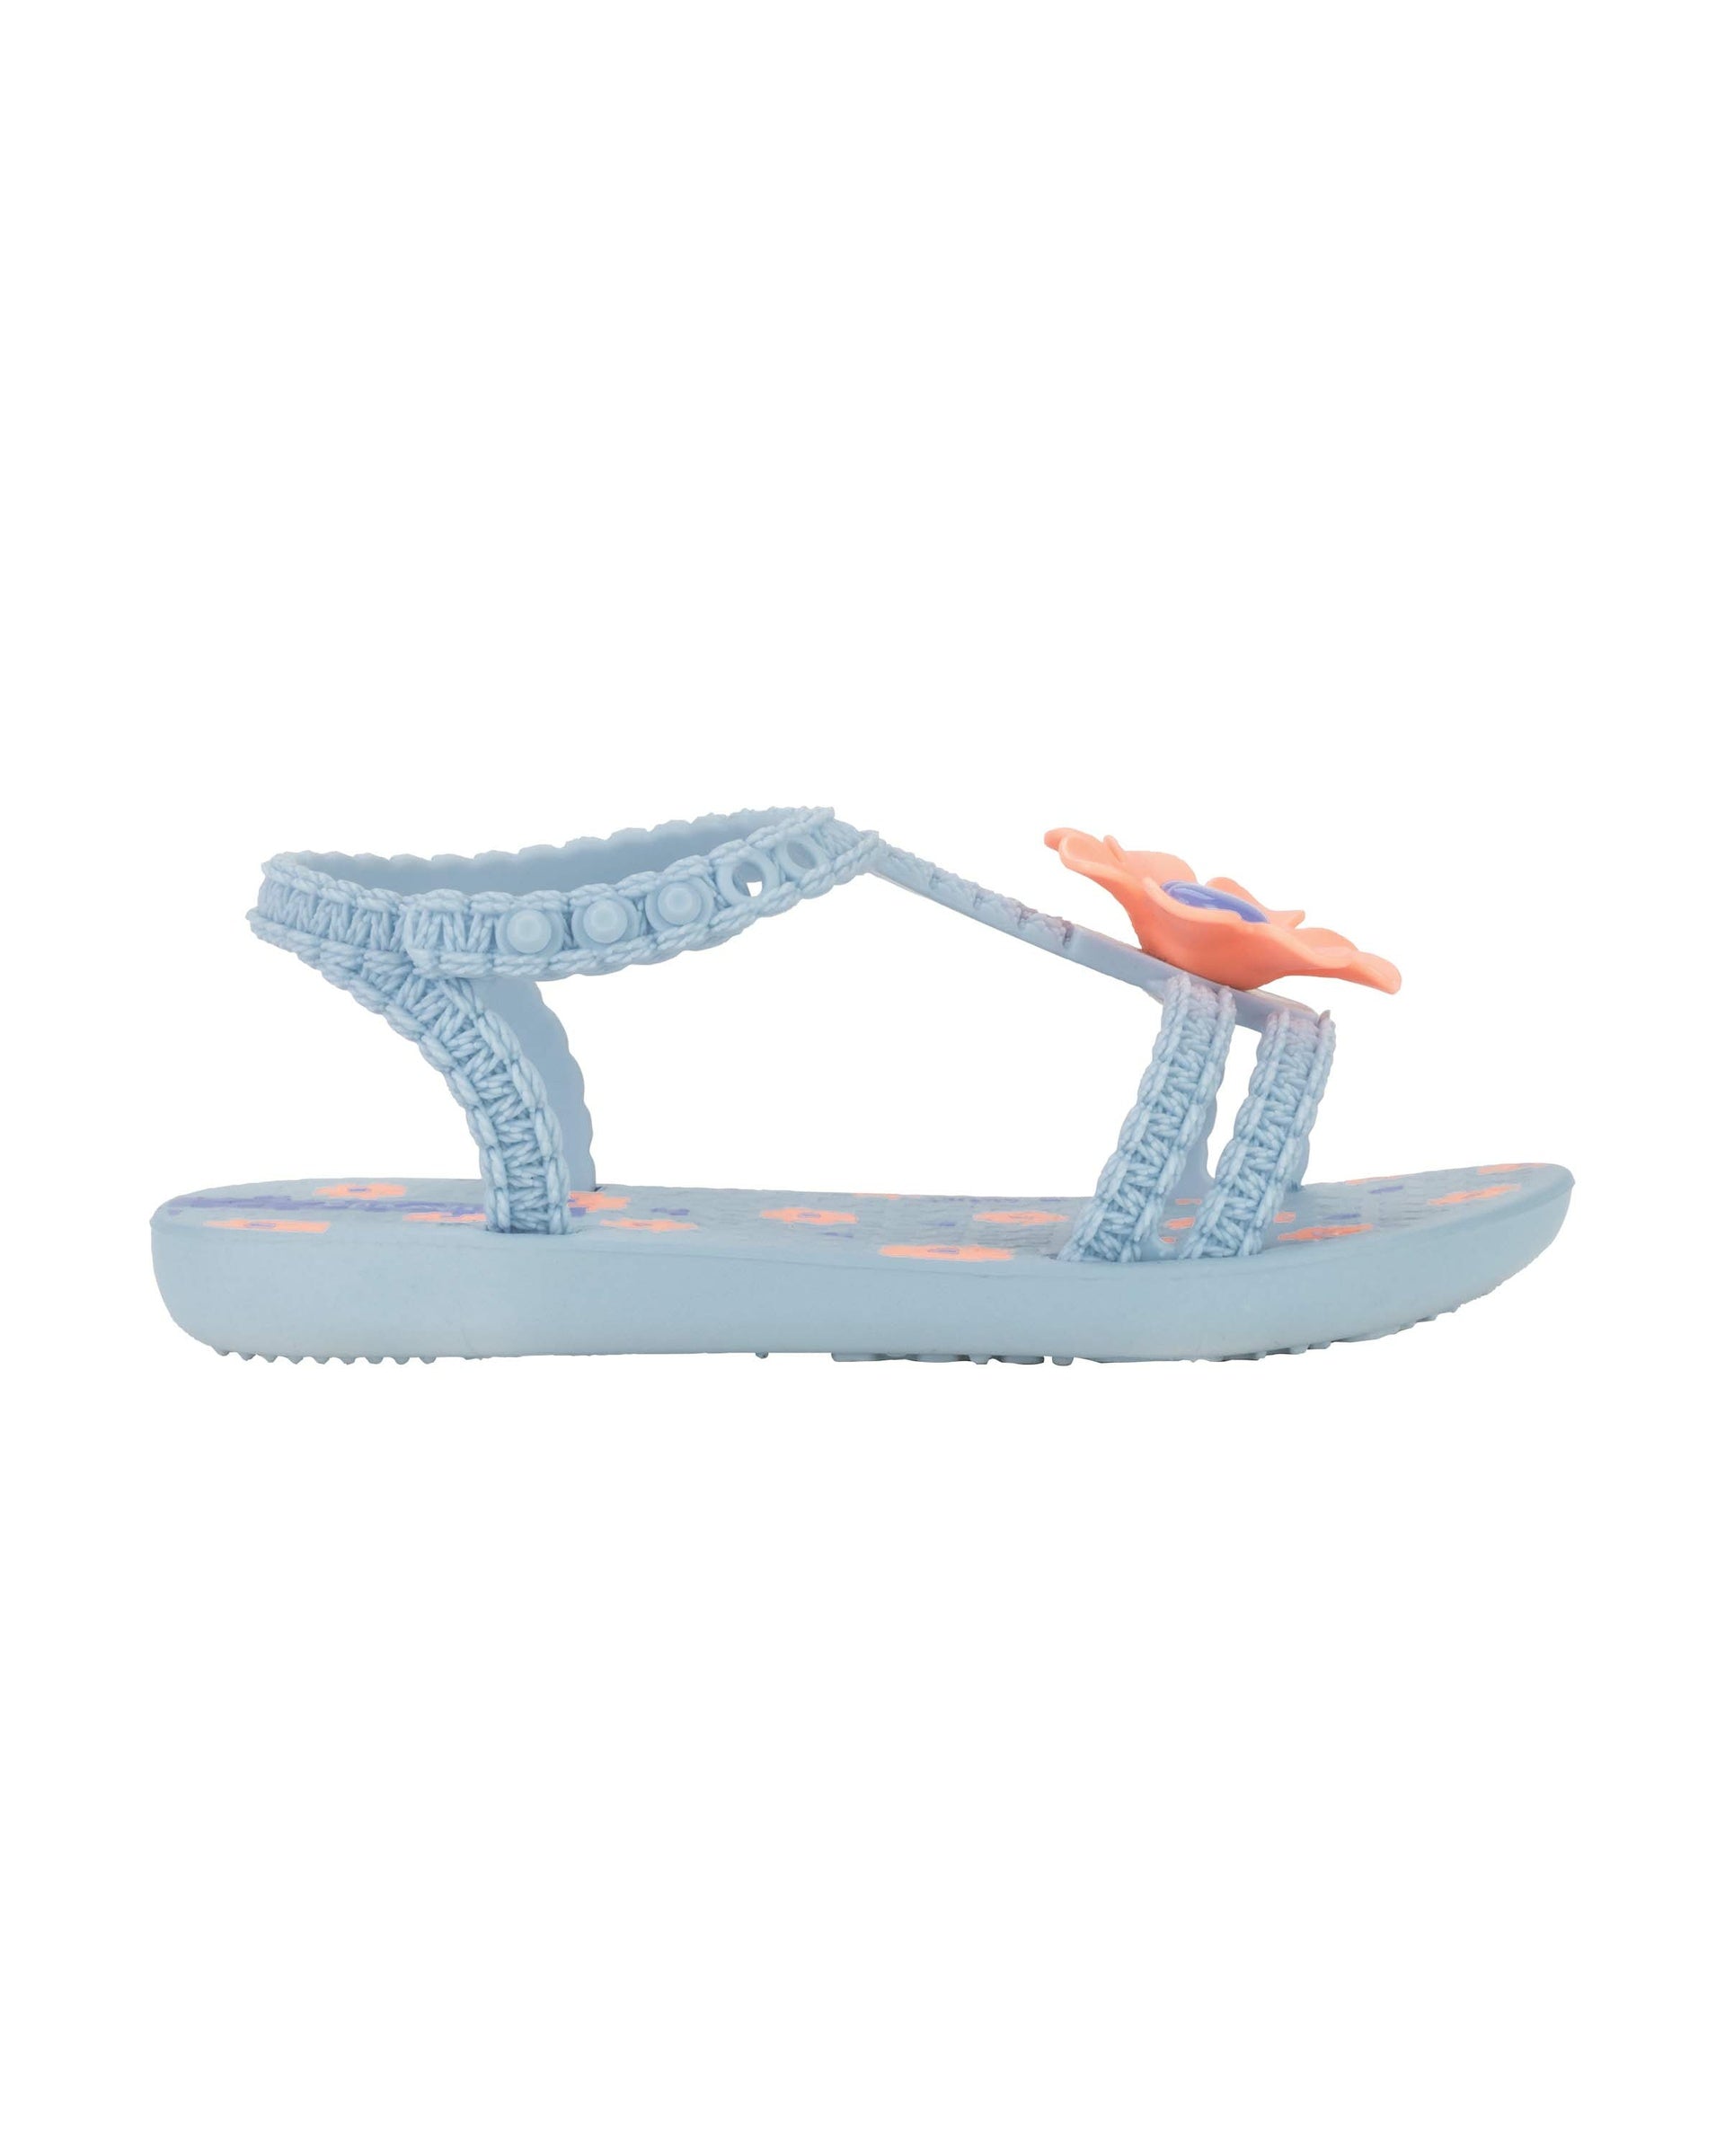 Outer side view of a blue Ipanema Daisy baby sandal with pink flower on top and crochet texture .